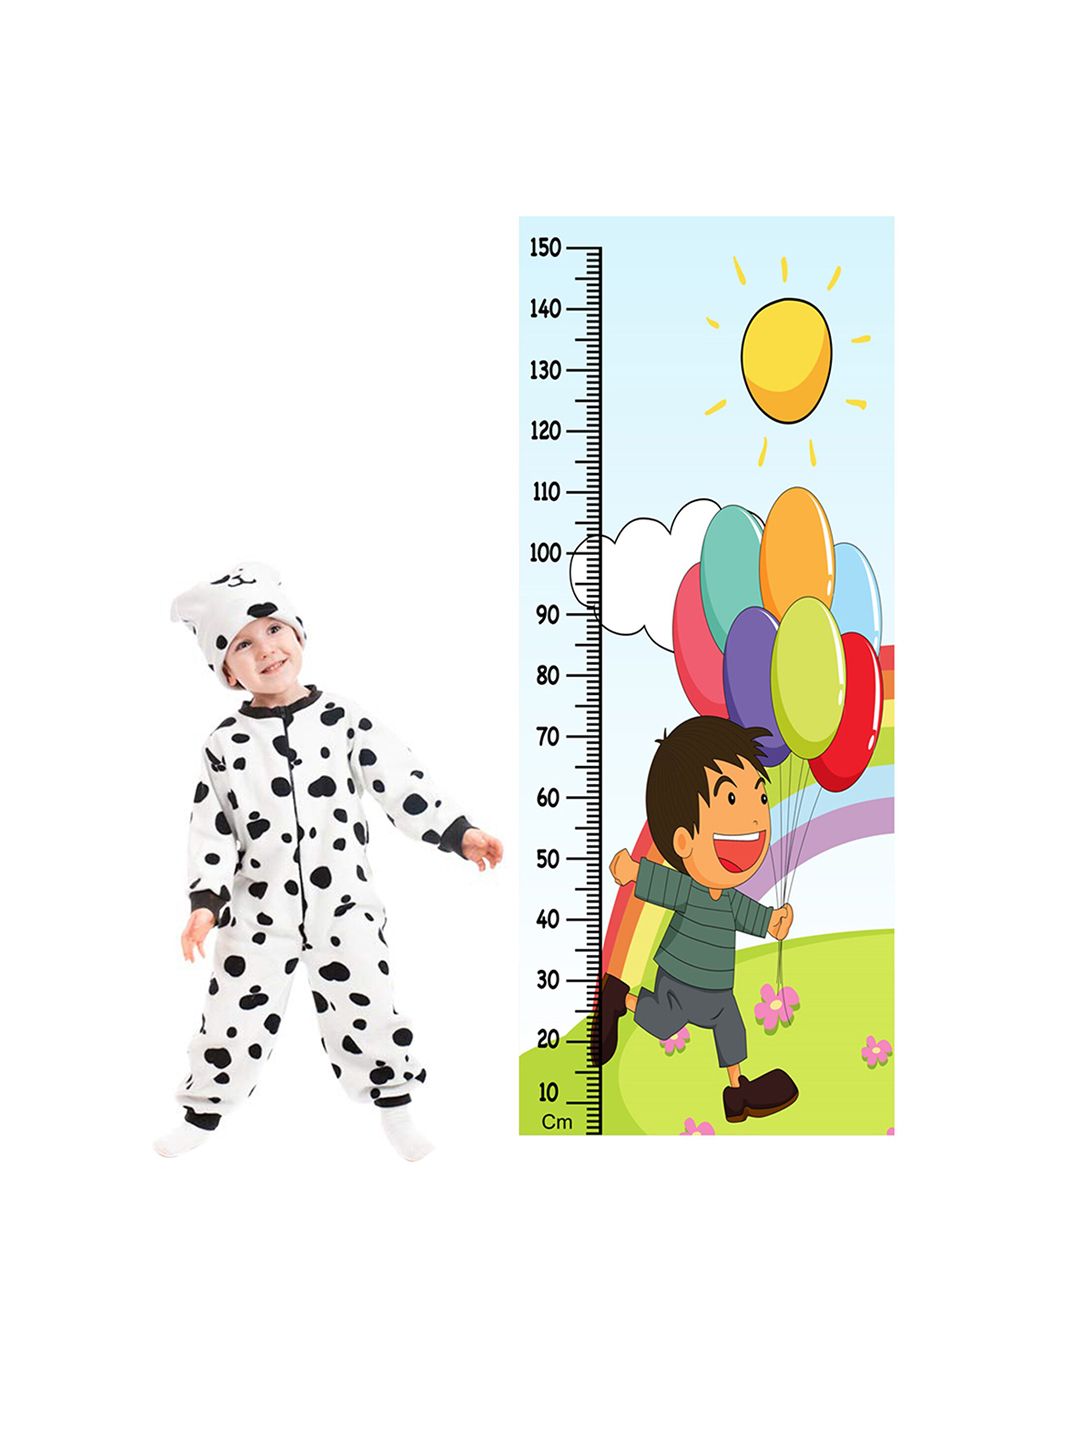 WENS Happy Kids Height Measurement Removable Wall Sticker Price in India